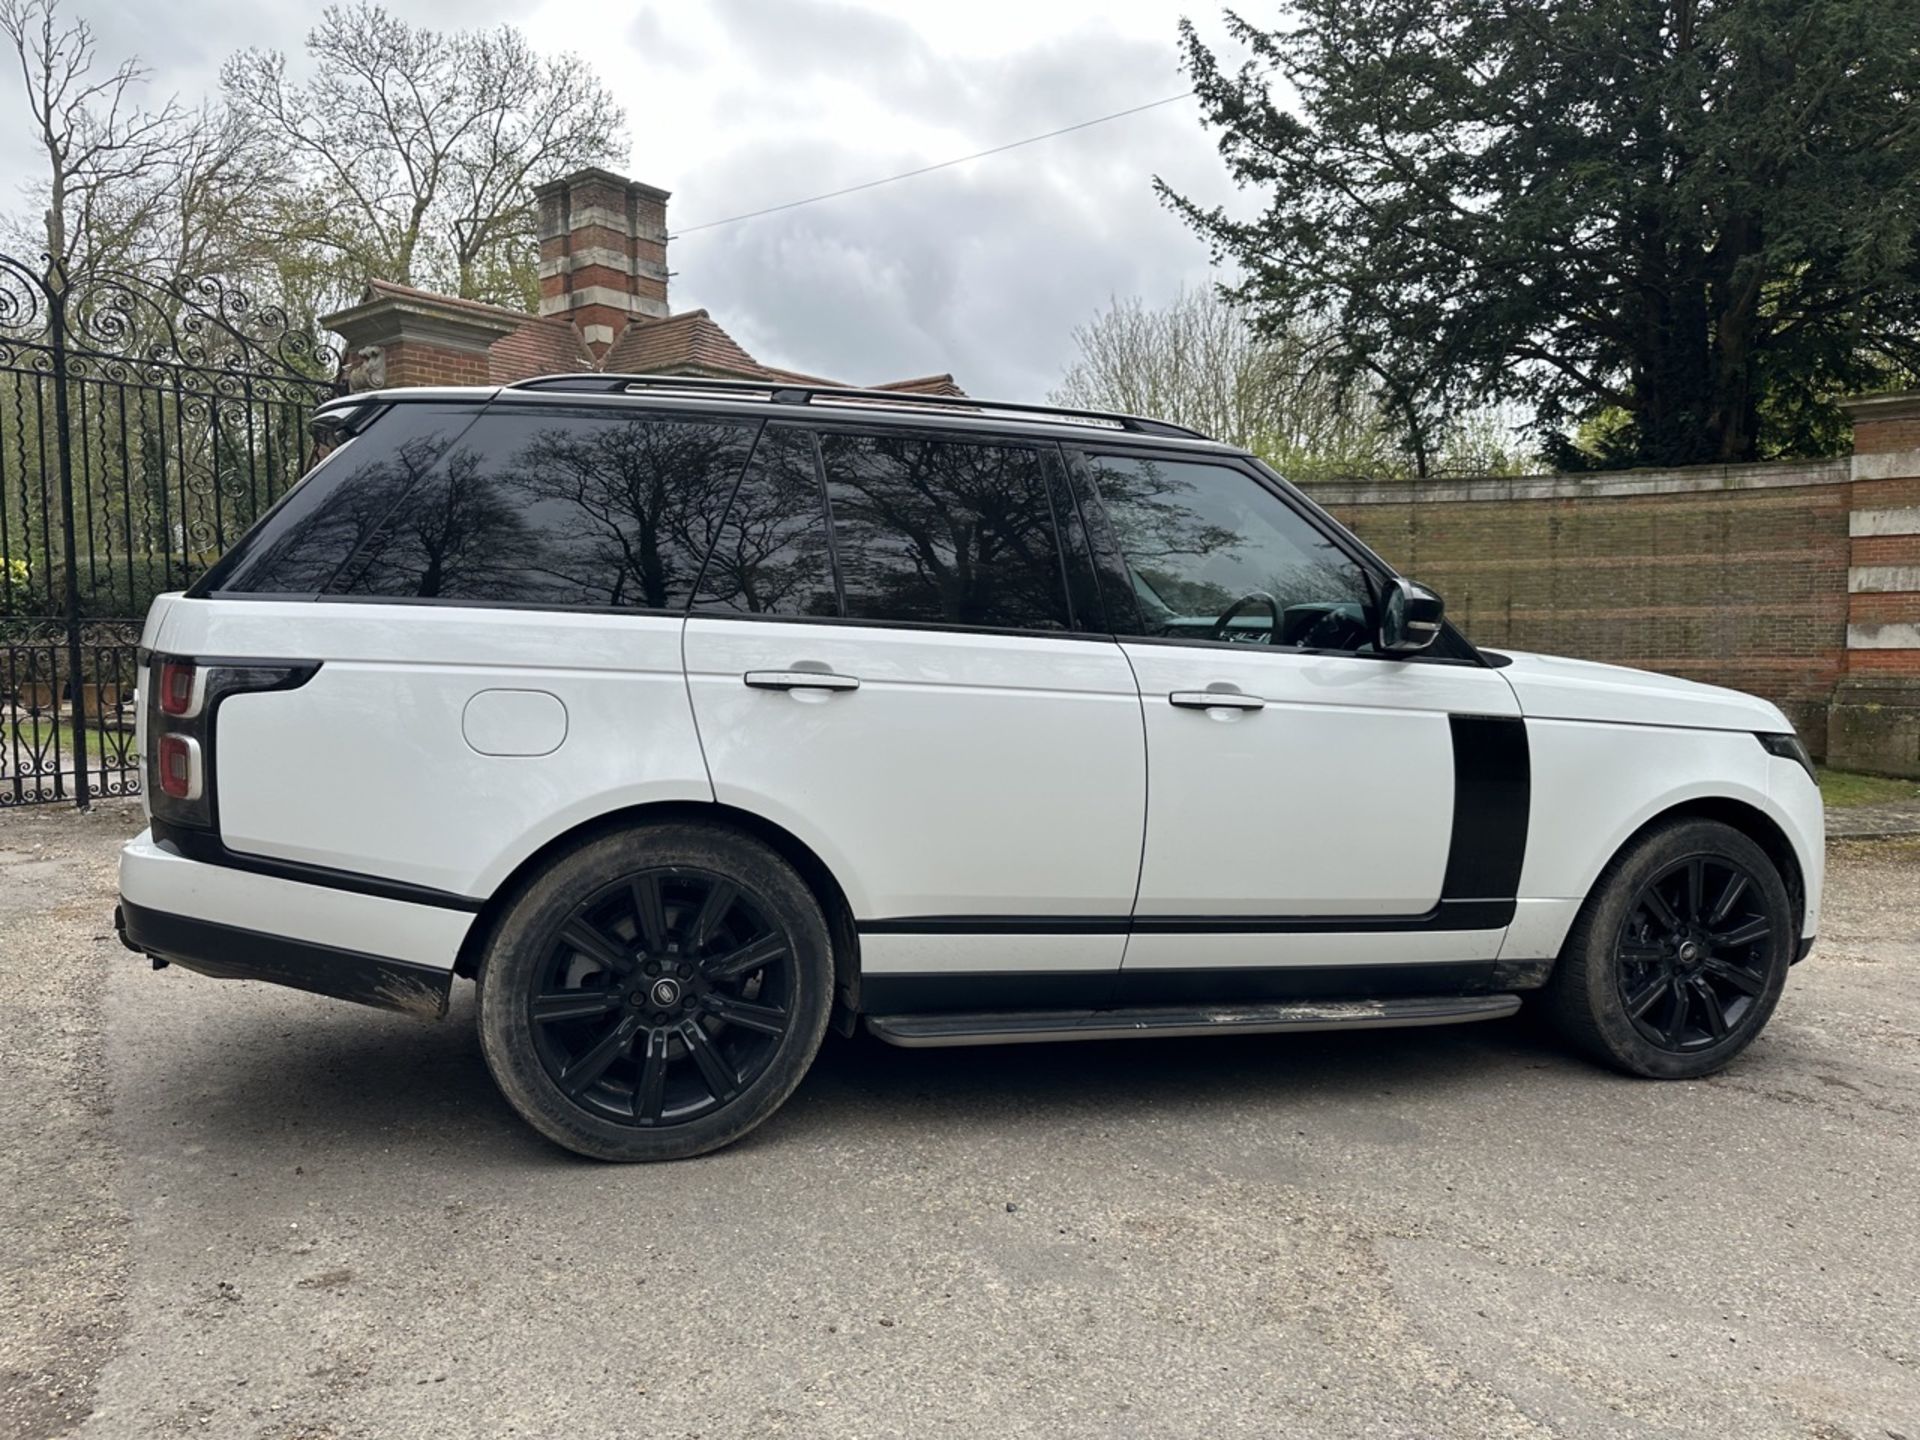 LAND ROVER RANGE ROVER 2.0 P400e Autobiography 4dr Auto - Automatic - 2018 - 31k miles - FULL SH - Image 10 of 32